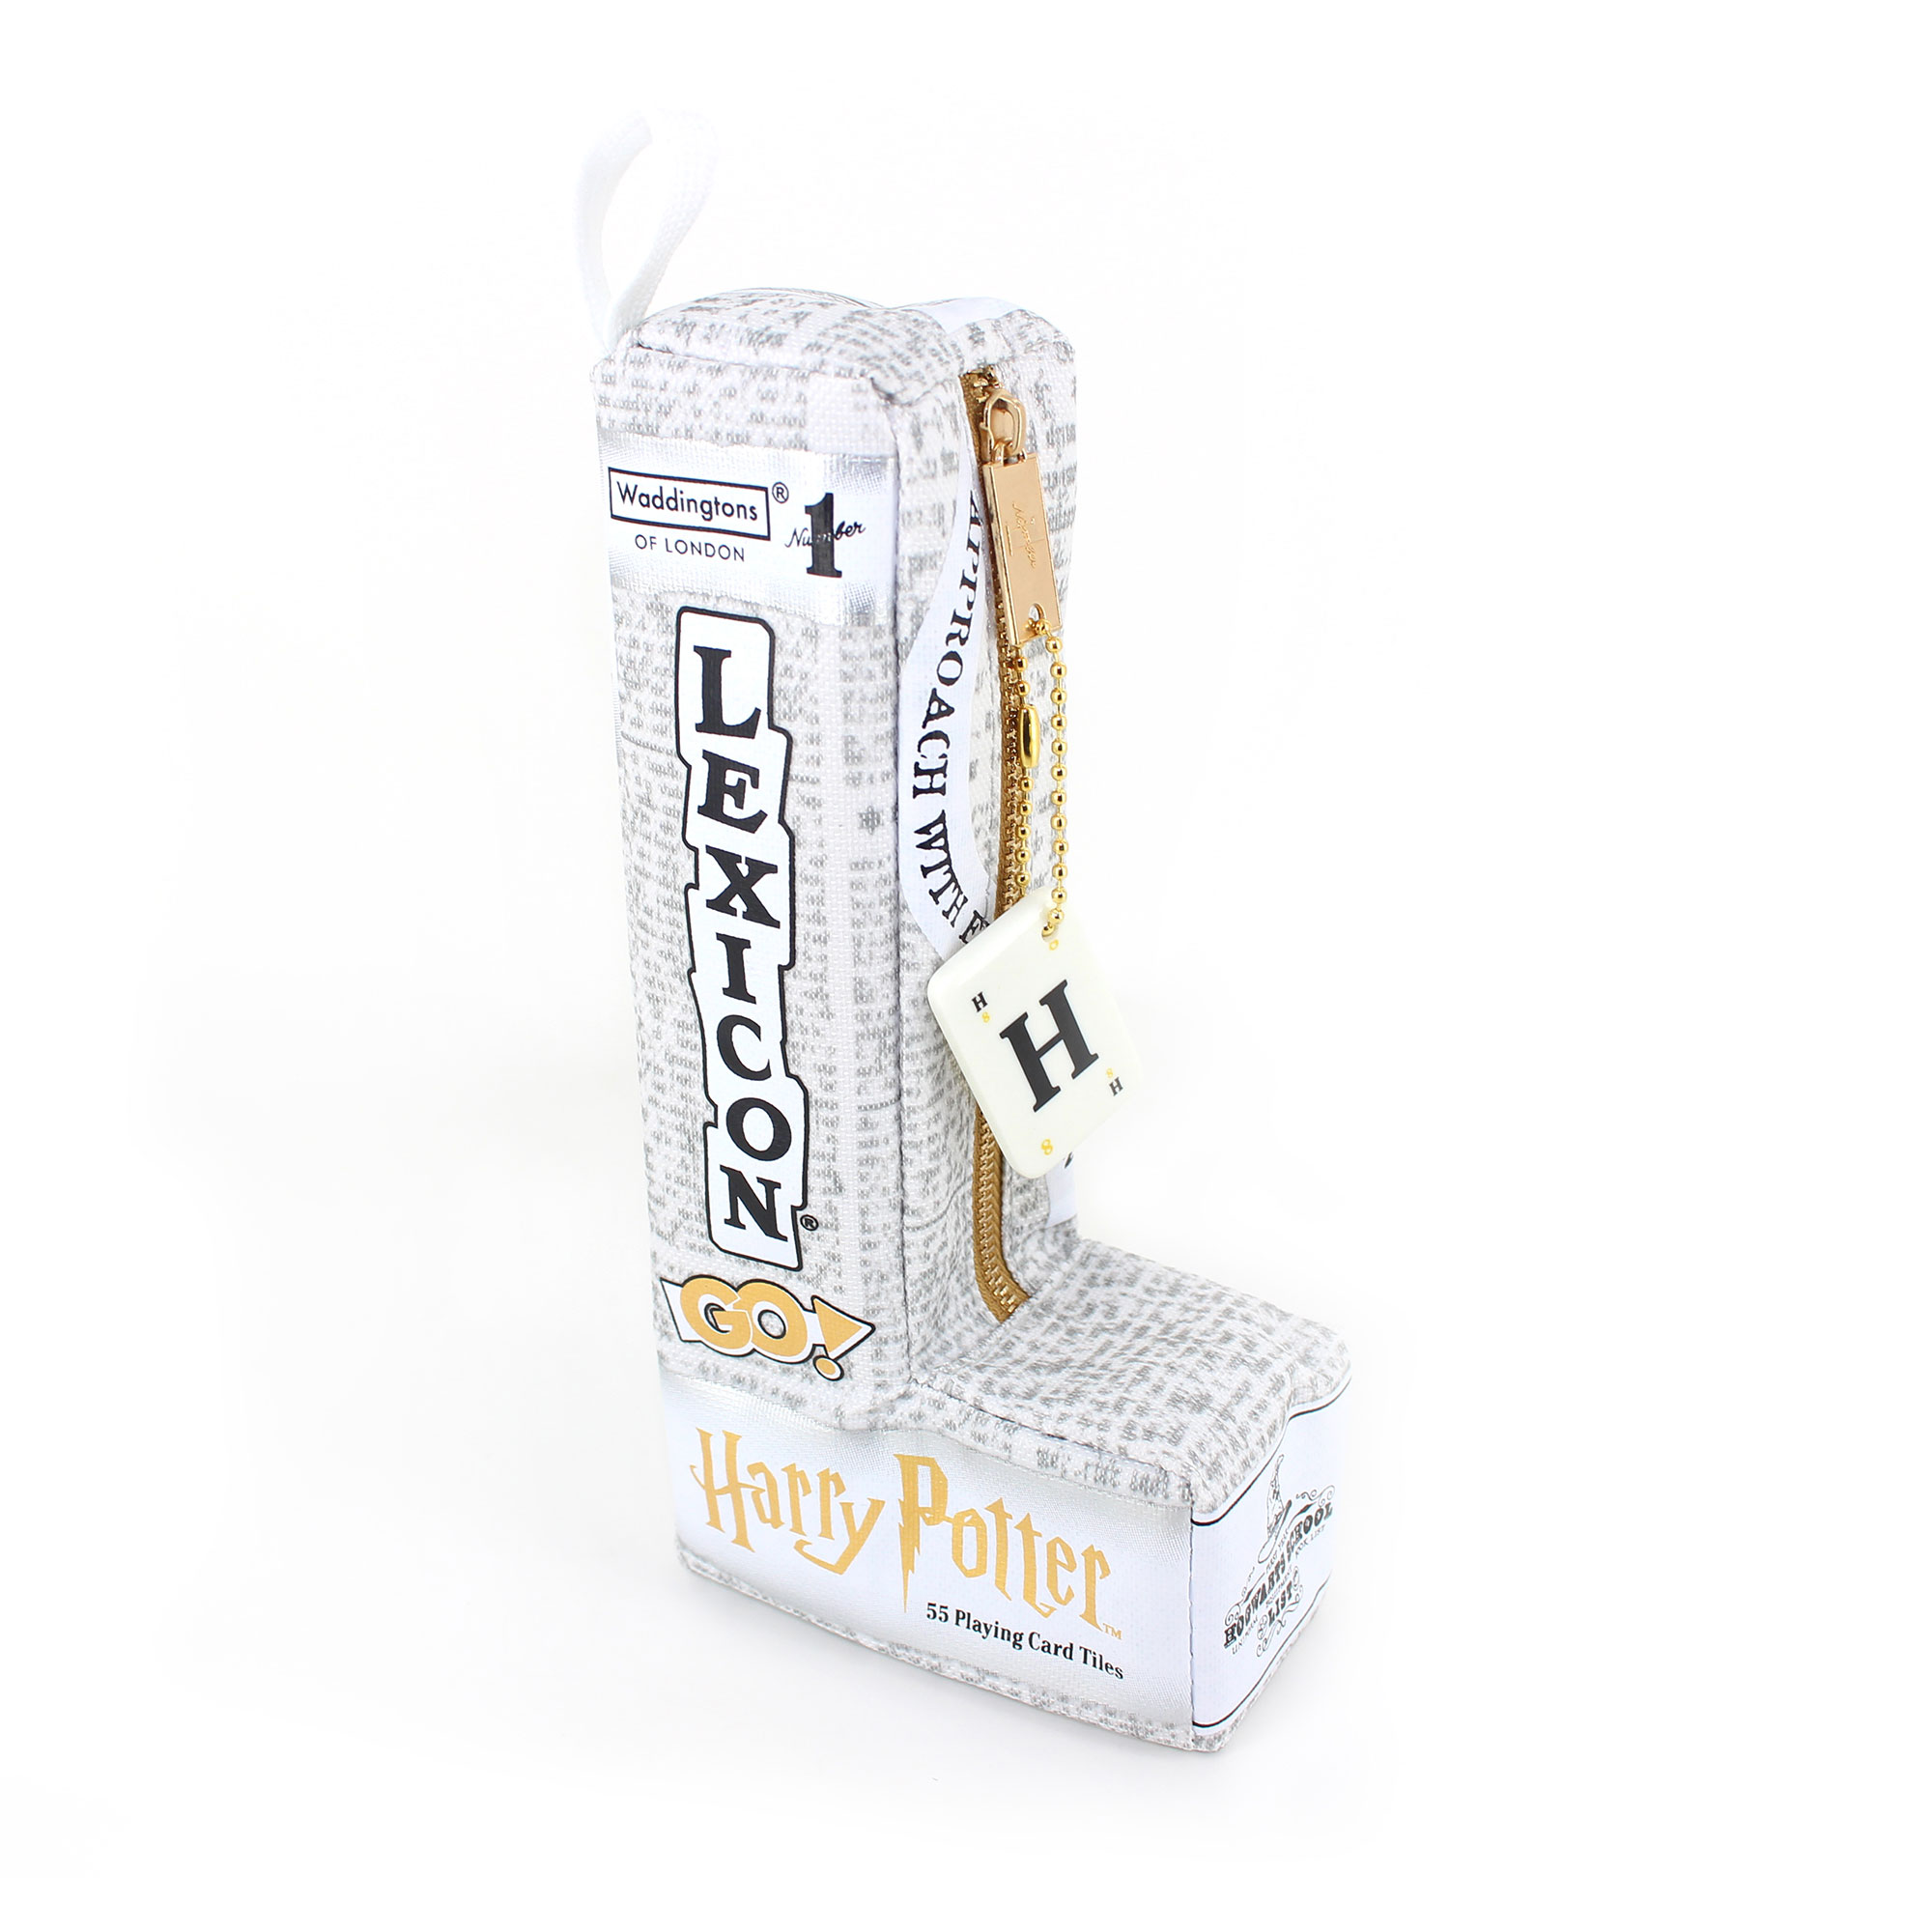 “Harry Potter” Lexicon GO! game package